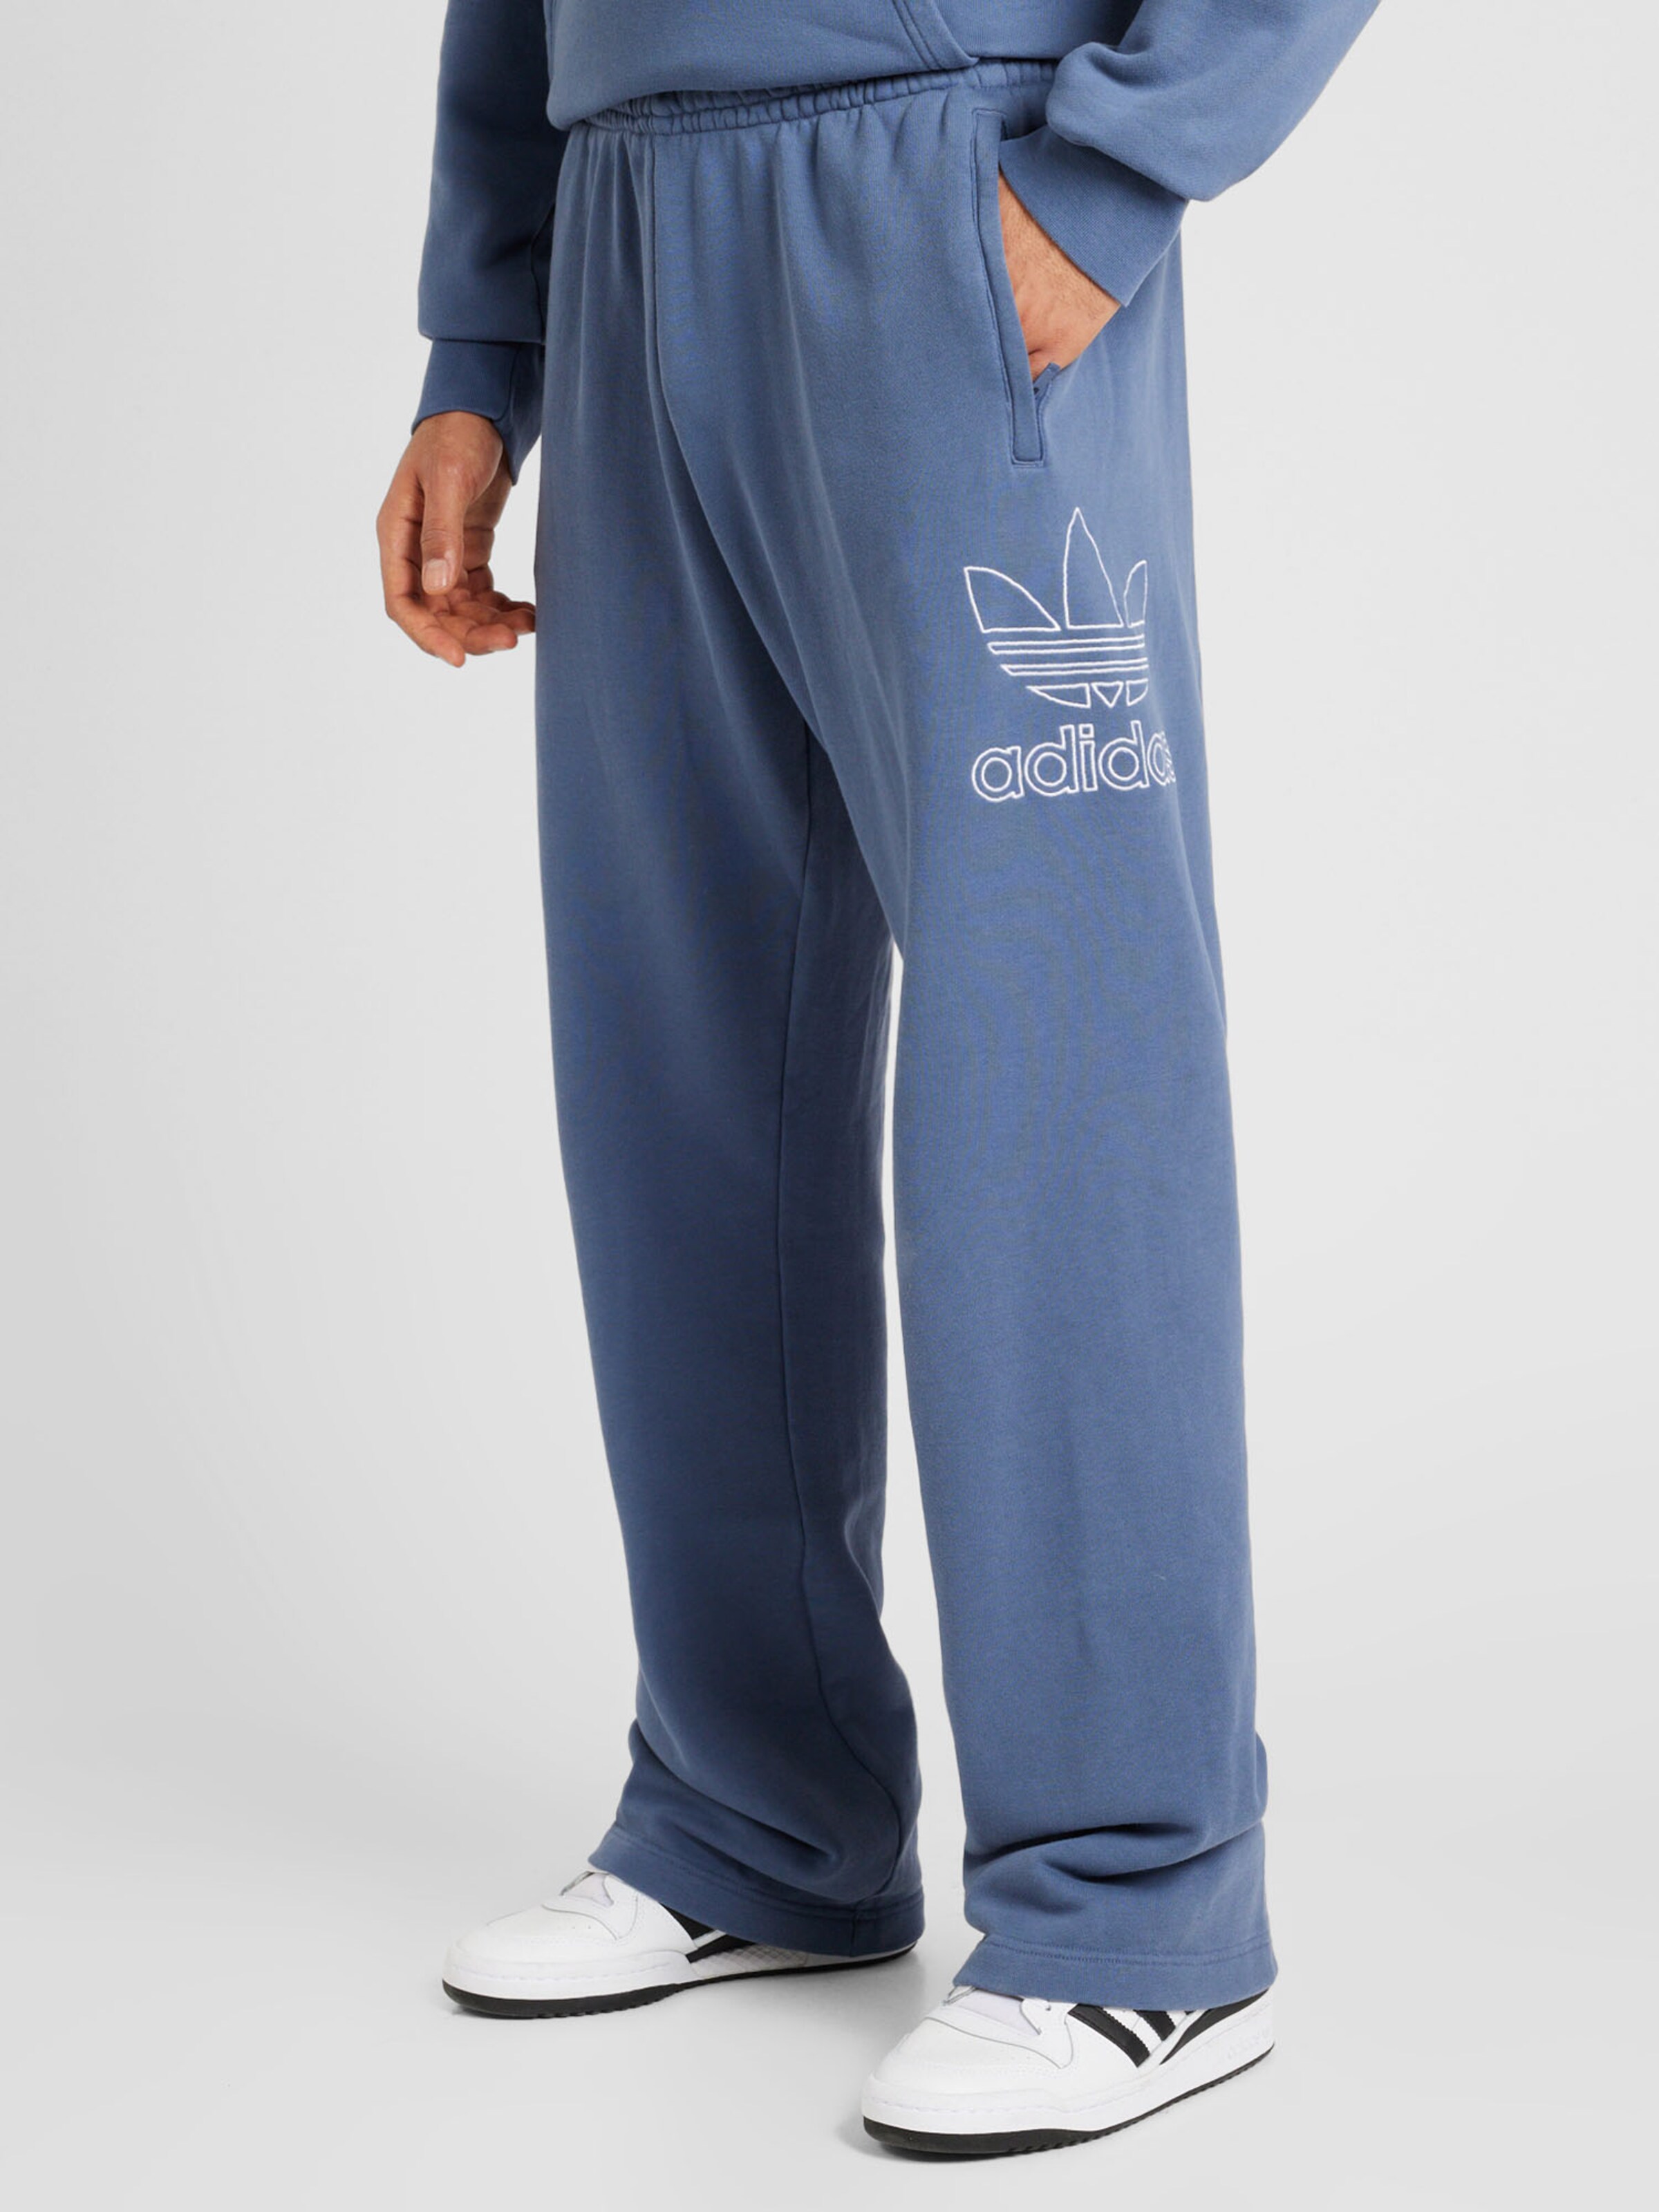 Buy Men's Blue Striped Relaxed Fit Track Pants Online at Bewakoof